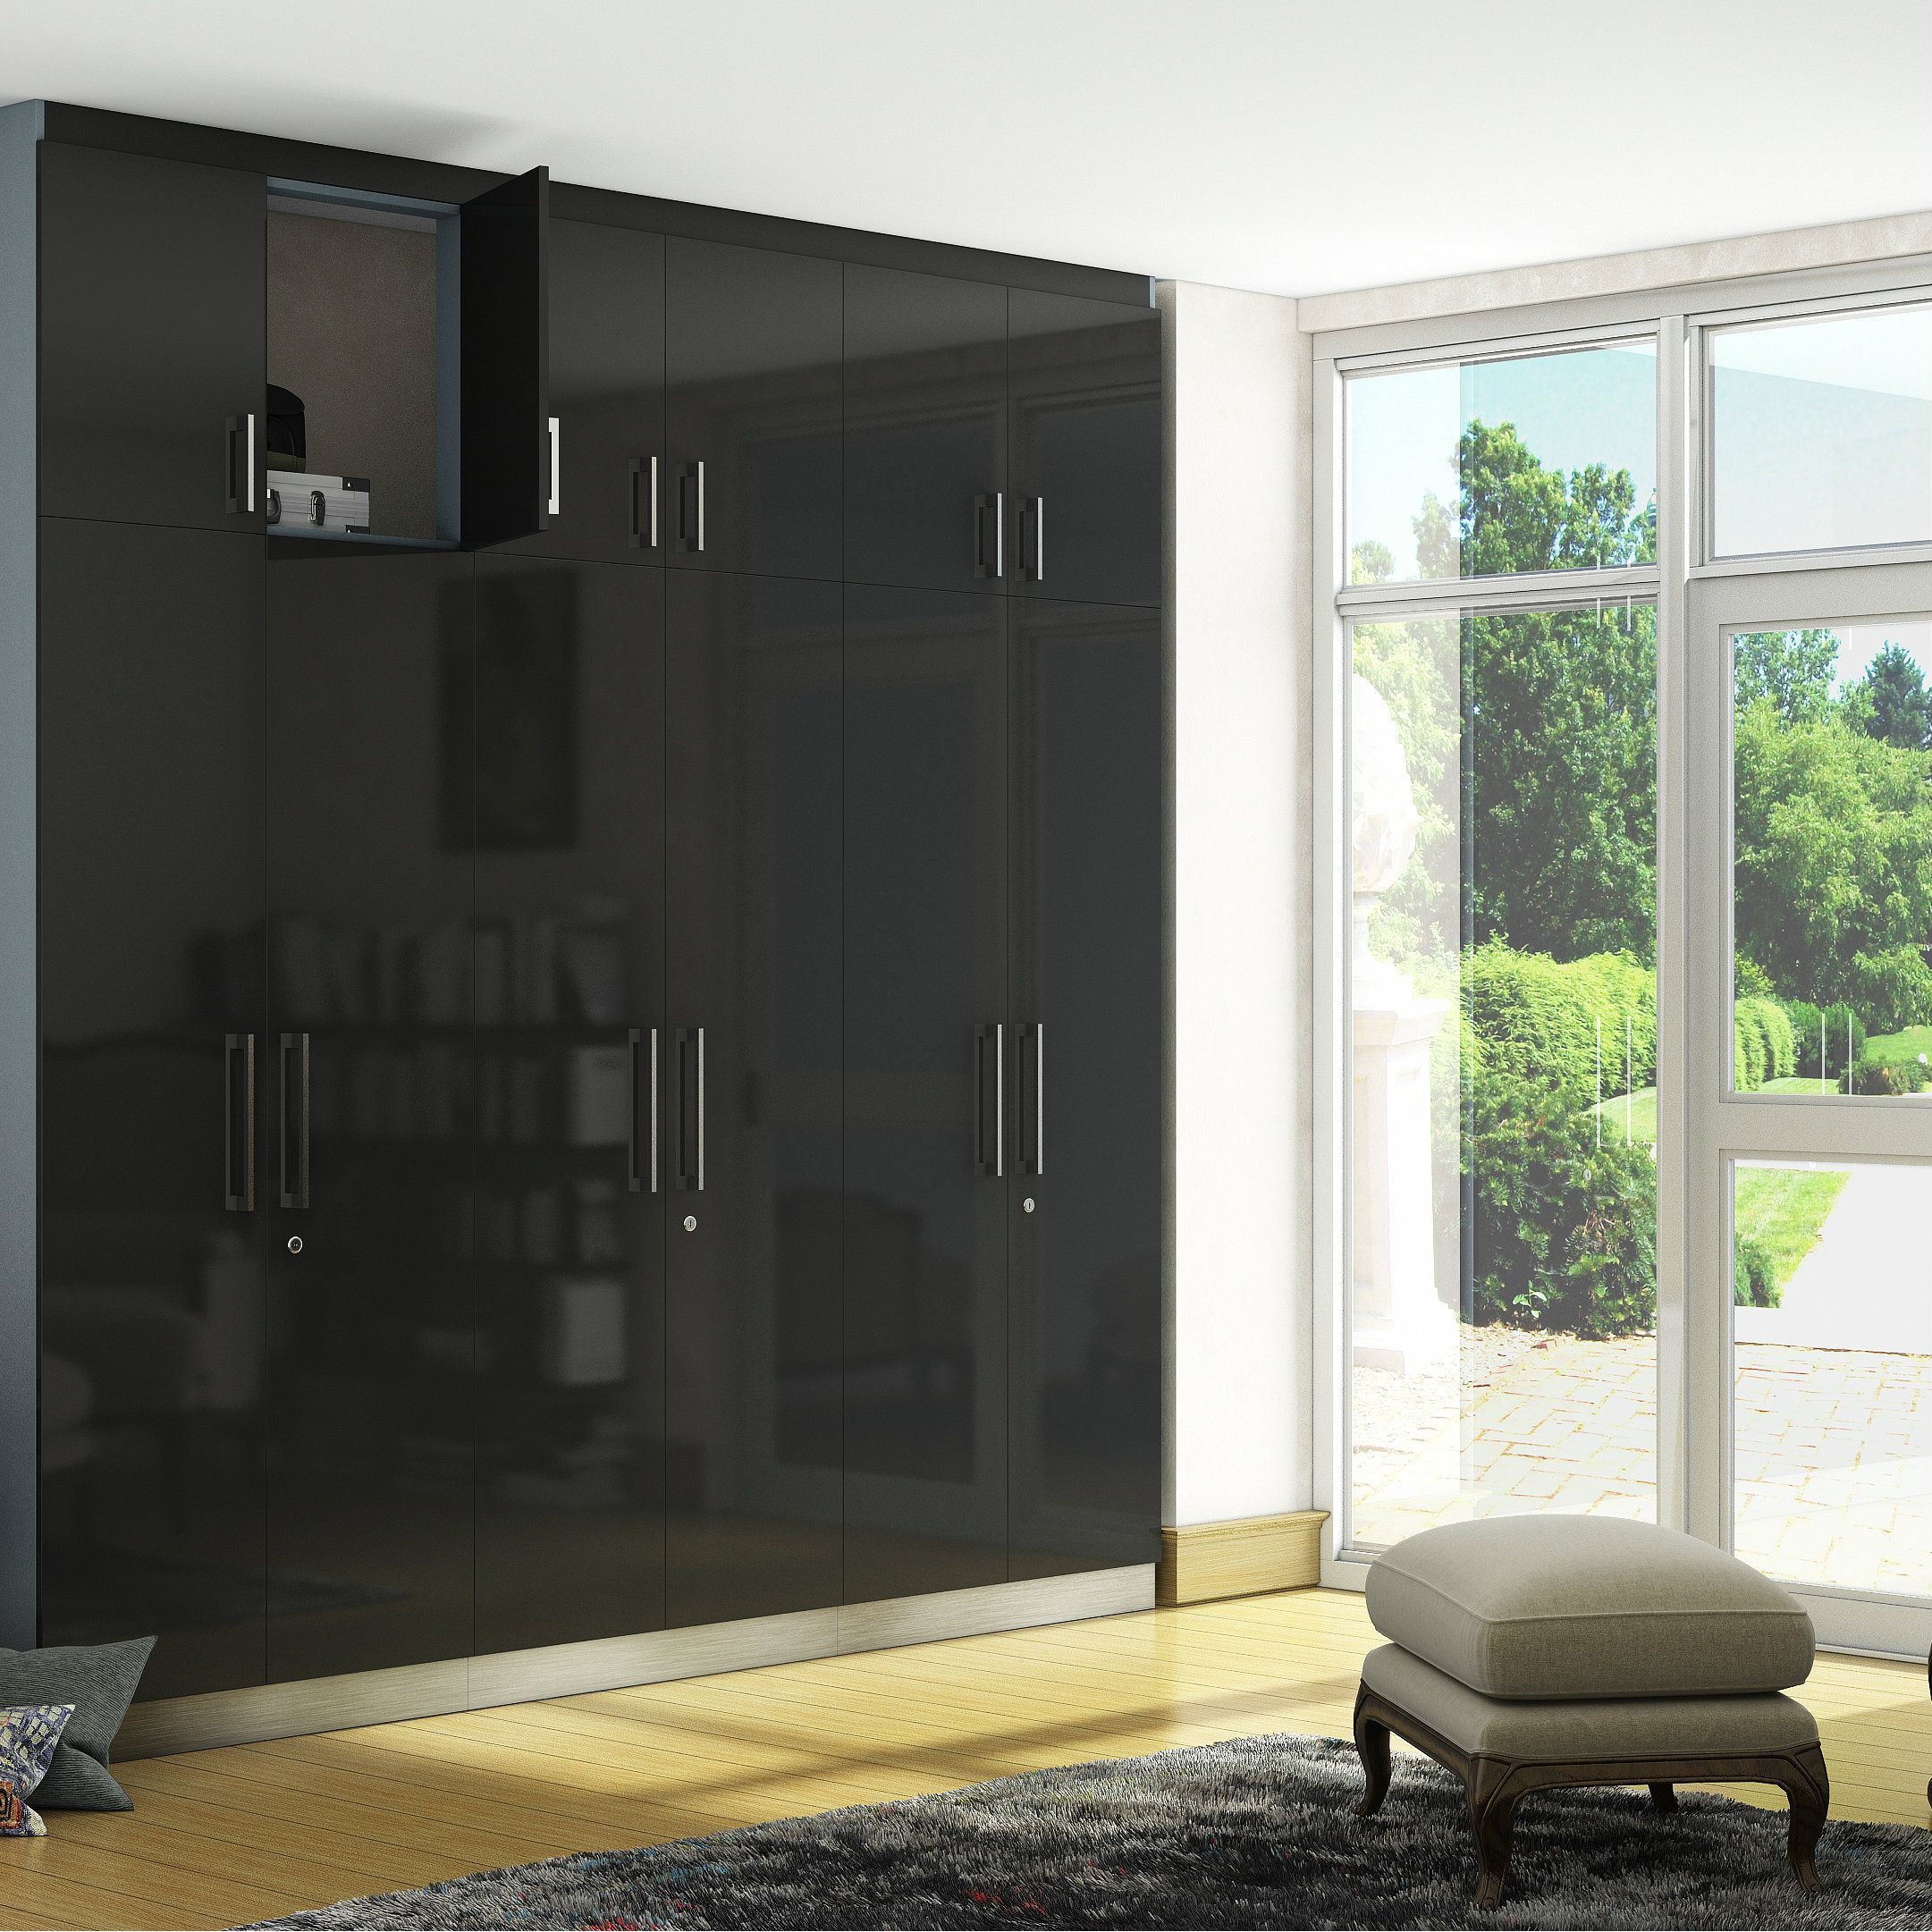 A Glossy Black Wardrobe That Is Every Bit As Impressive And Functional |  Wardrobe Design, Furniture Design, Grey Wardrobe Within Black Shiny Wardrobes (View 2 of 15)